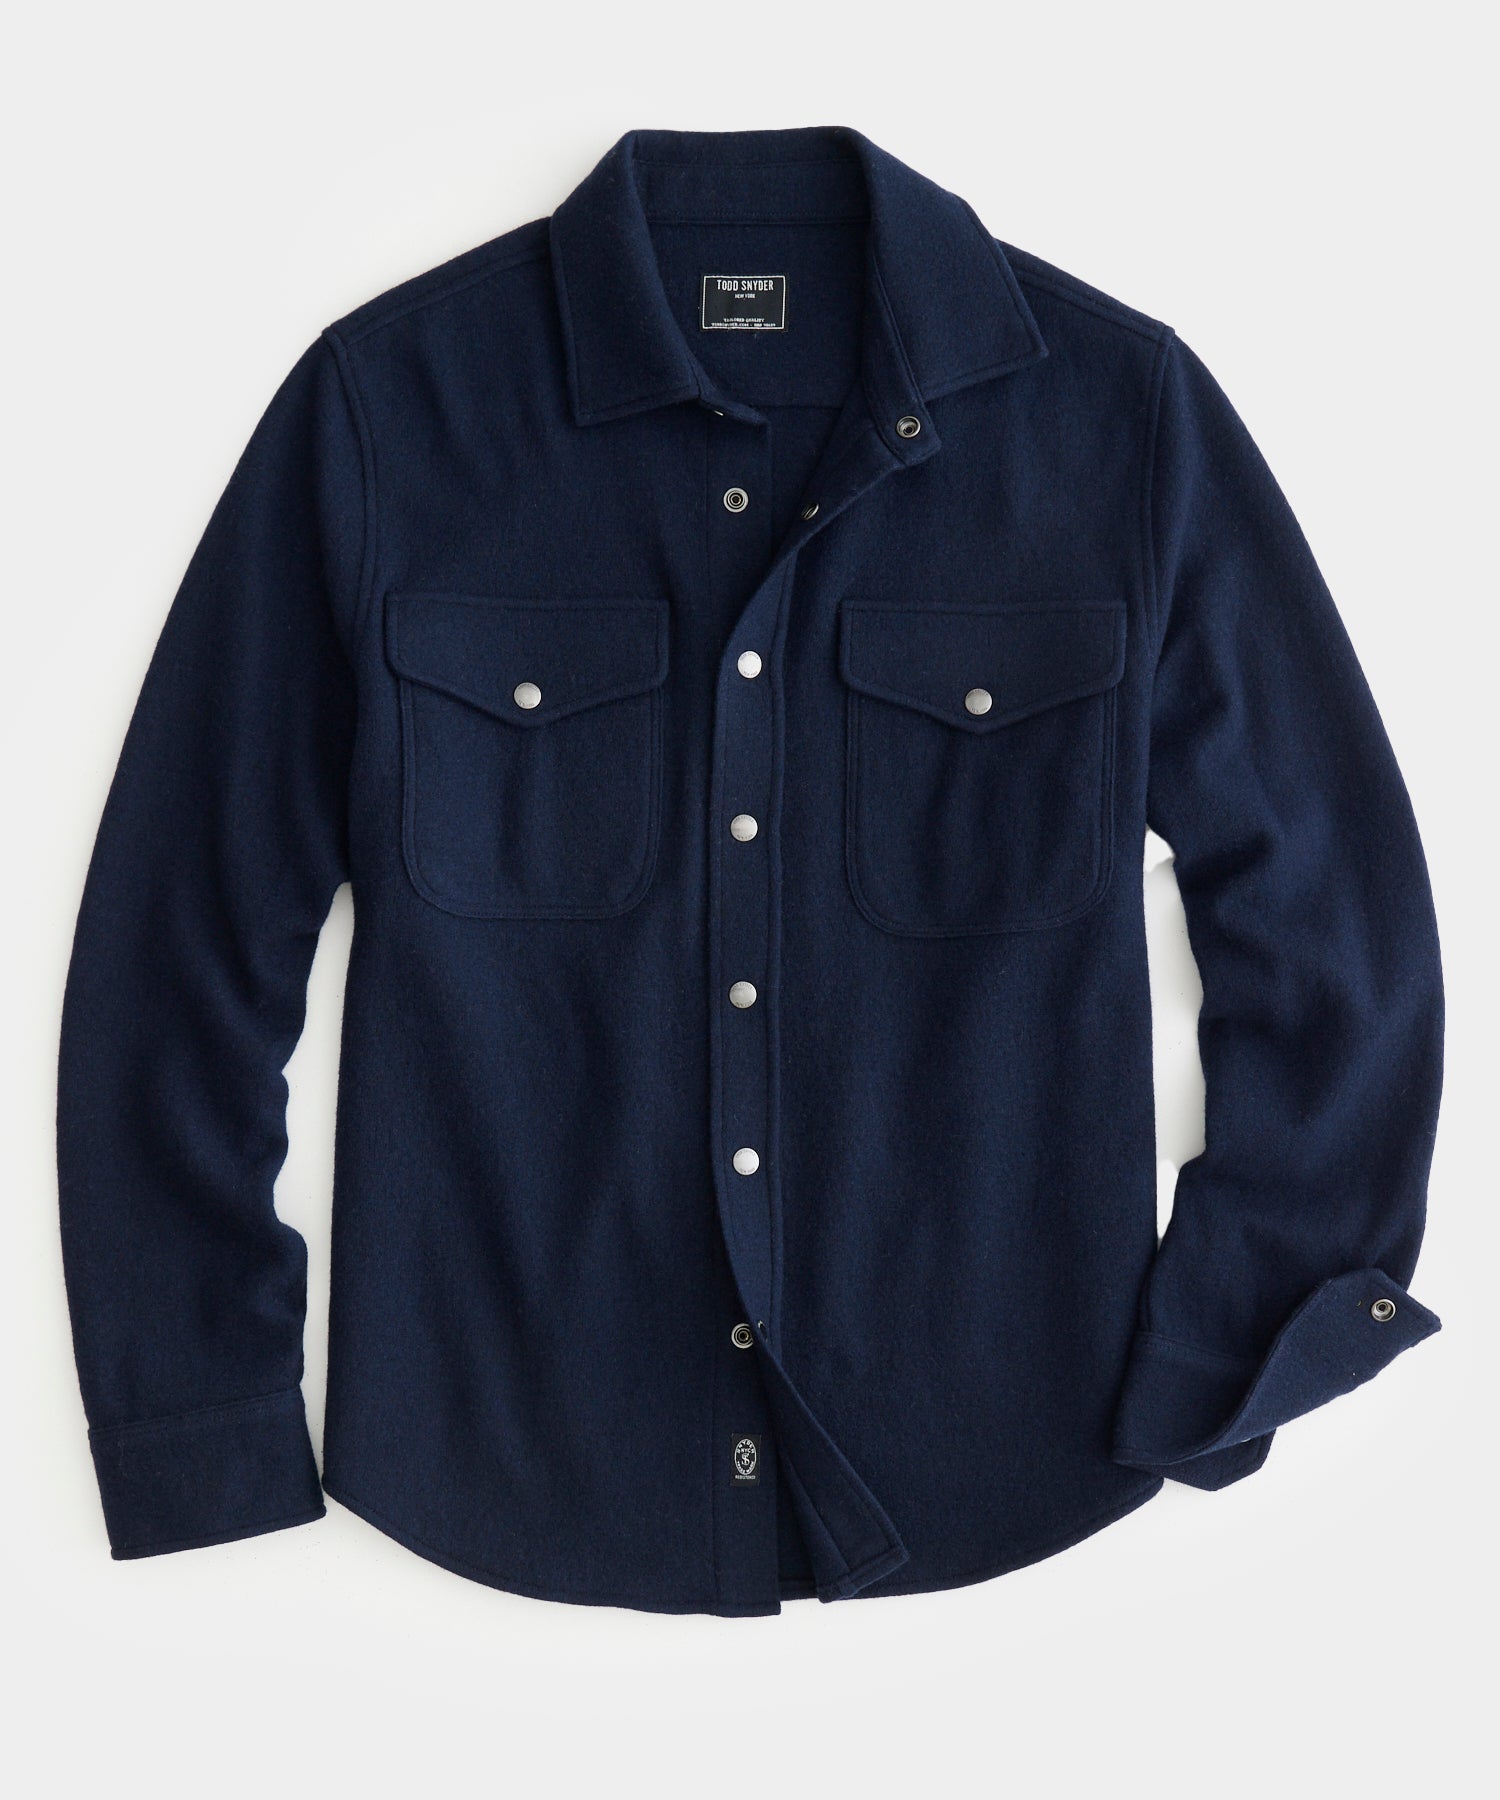 Wool Cashmere Military Shirt in Navy